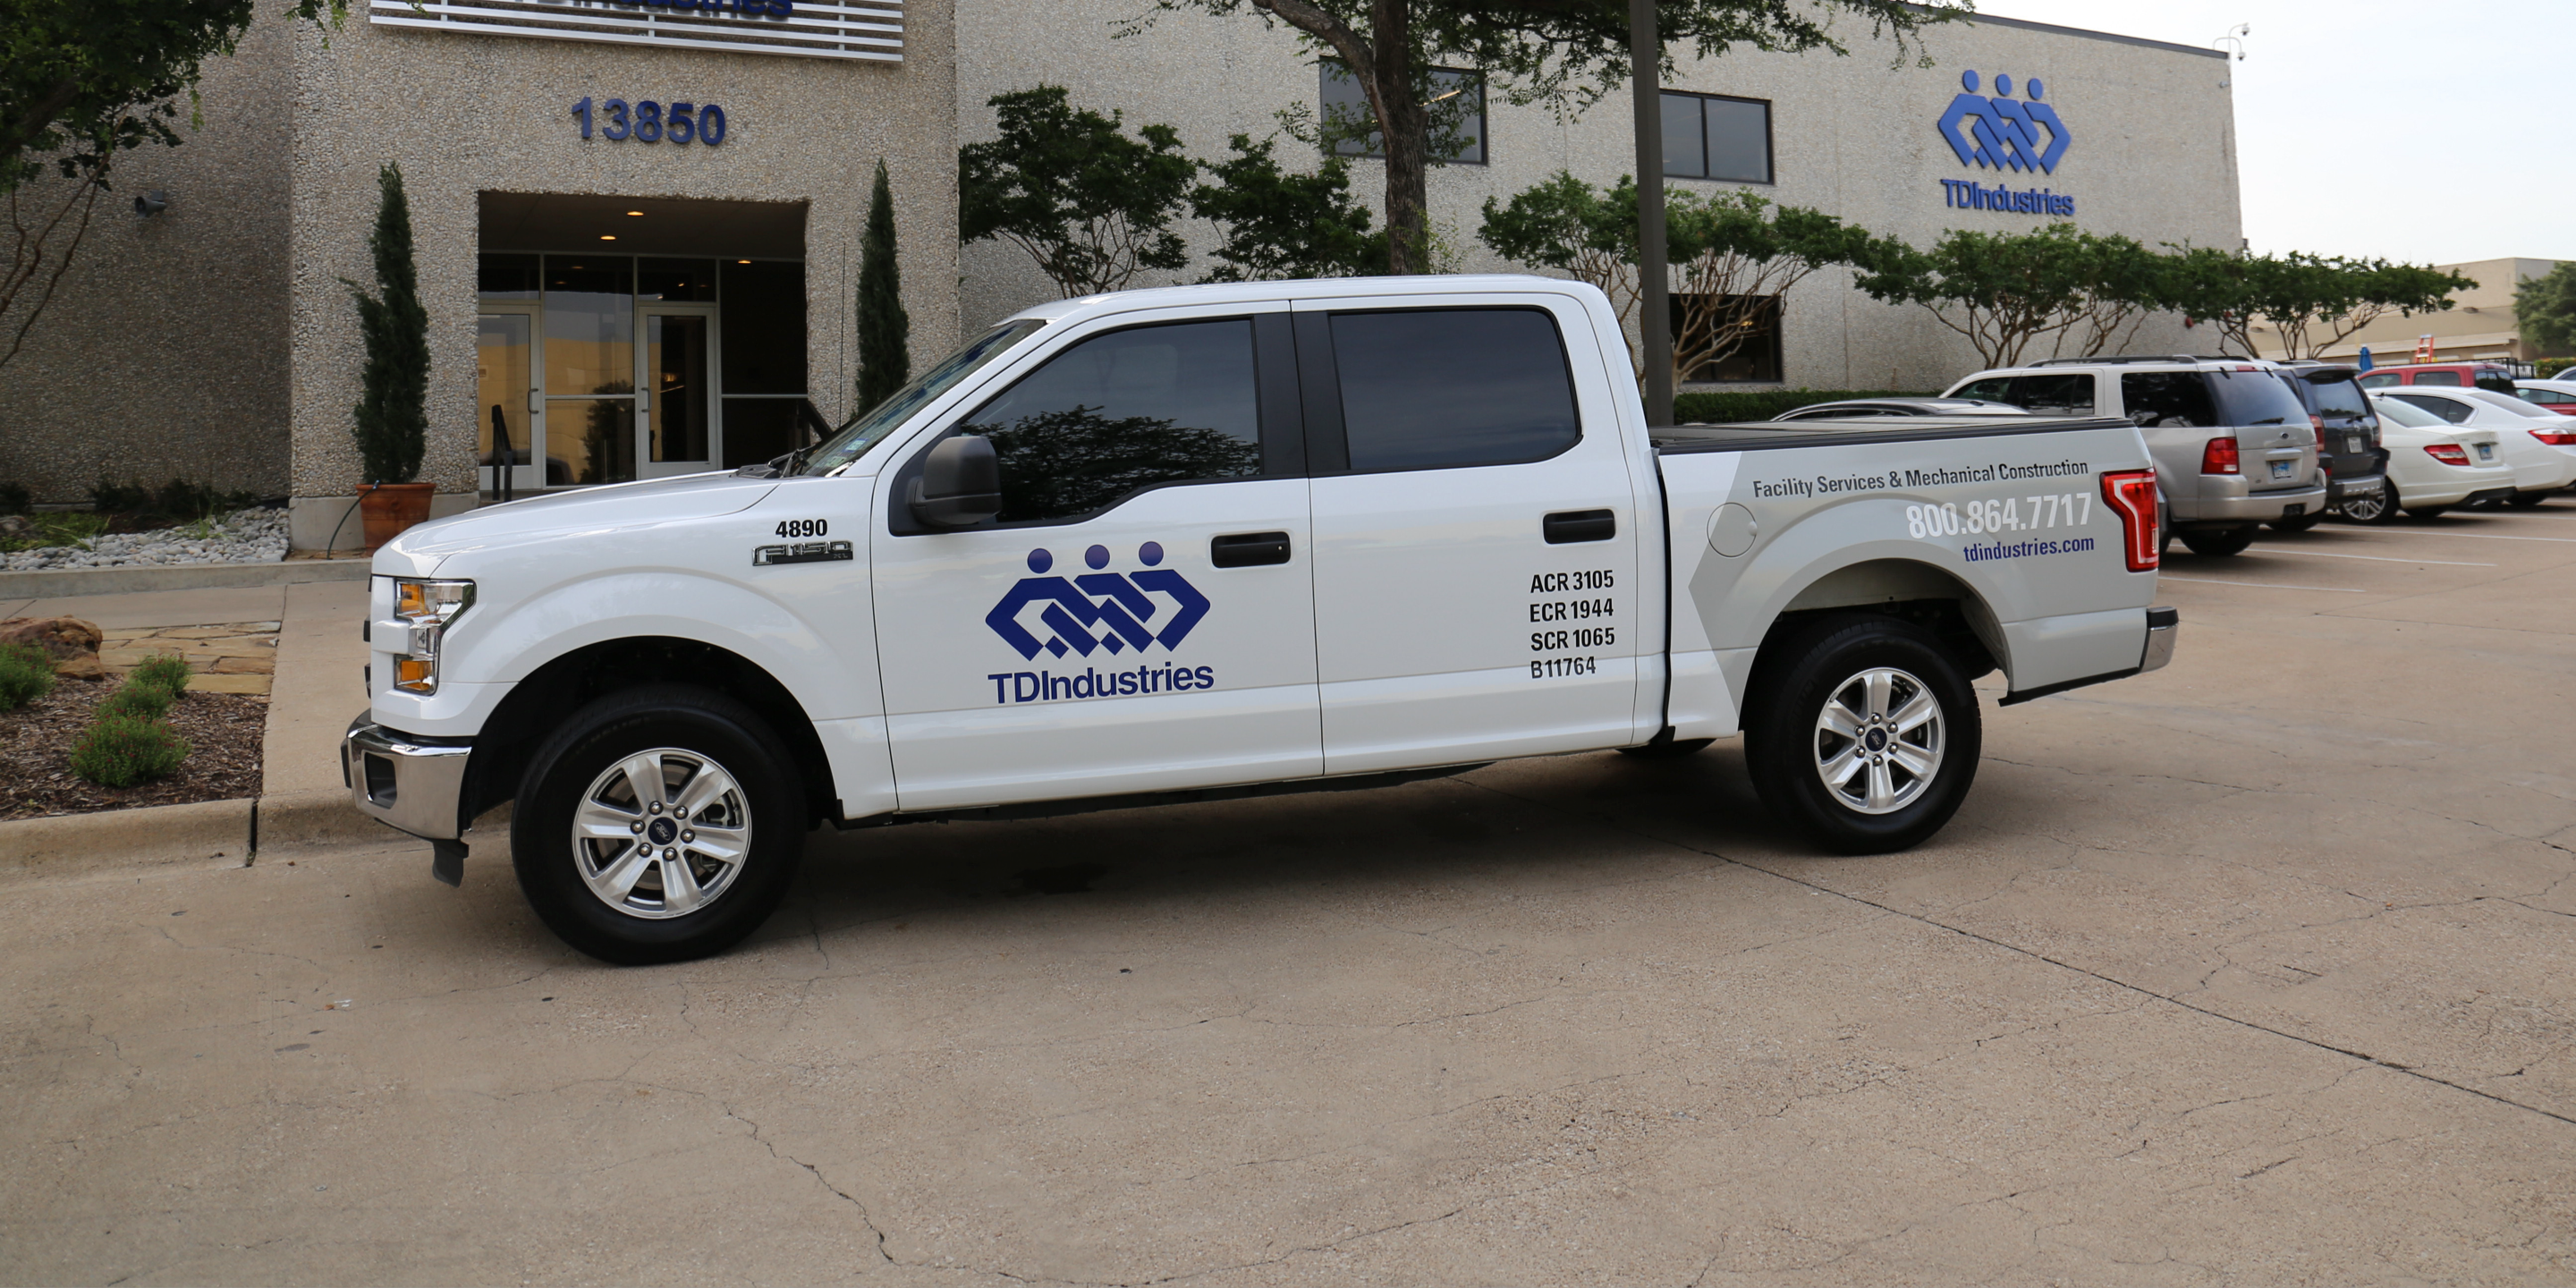 TDIndustries maintenance vehicle parks in front of Dallas headquarters